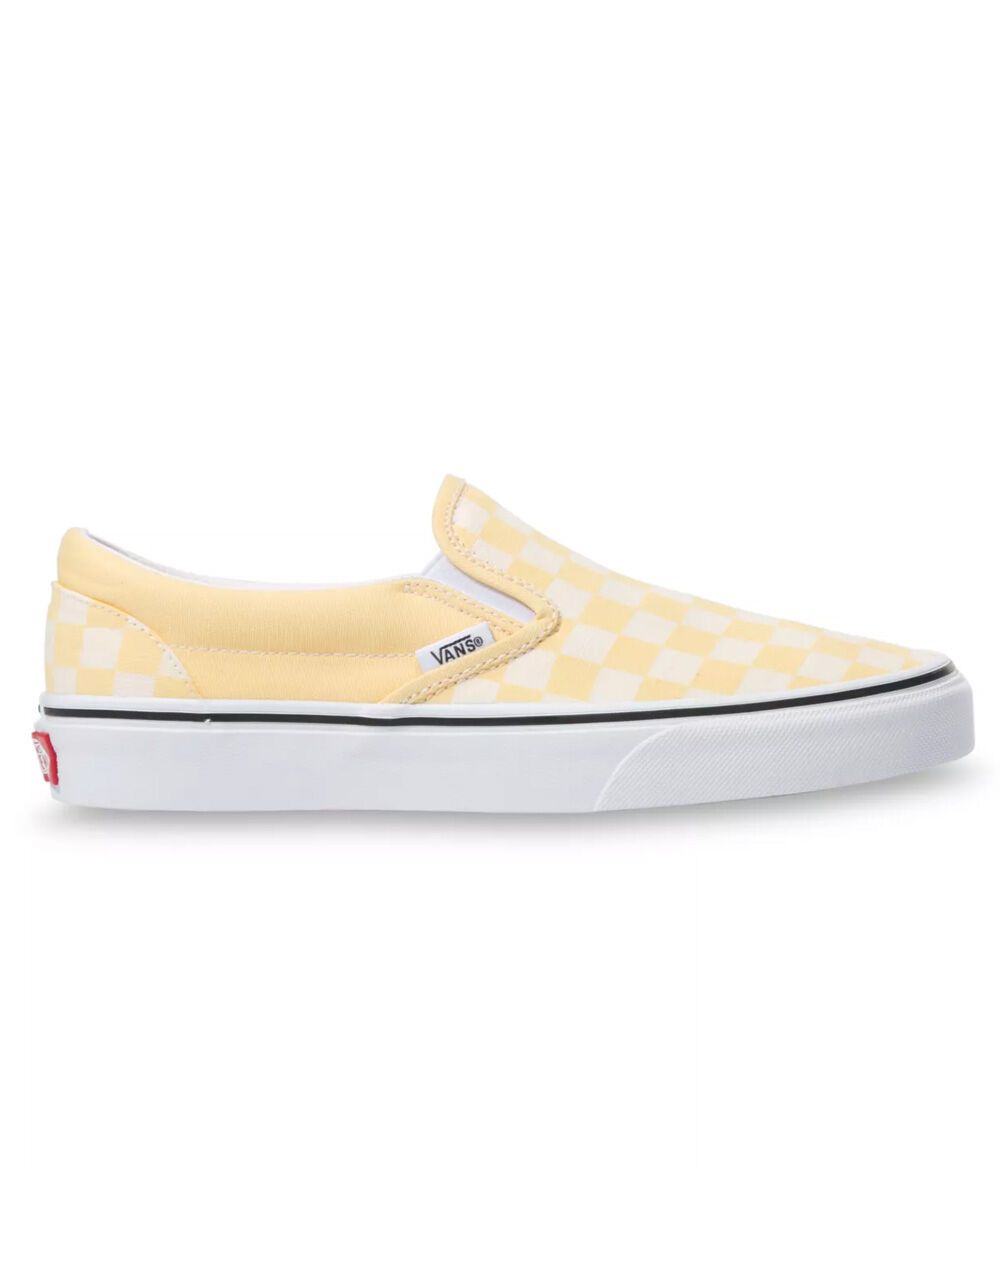 VANS Checkerboard Yellow & True White Slip-On Shoes | Tillys